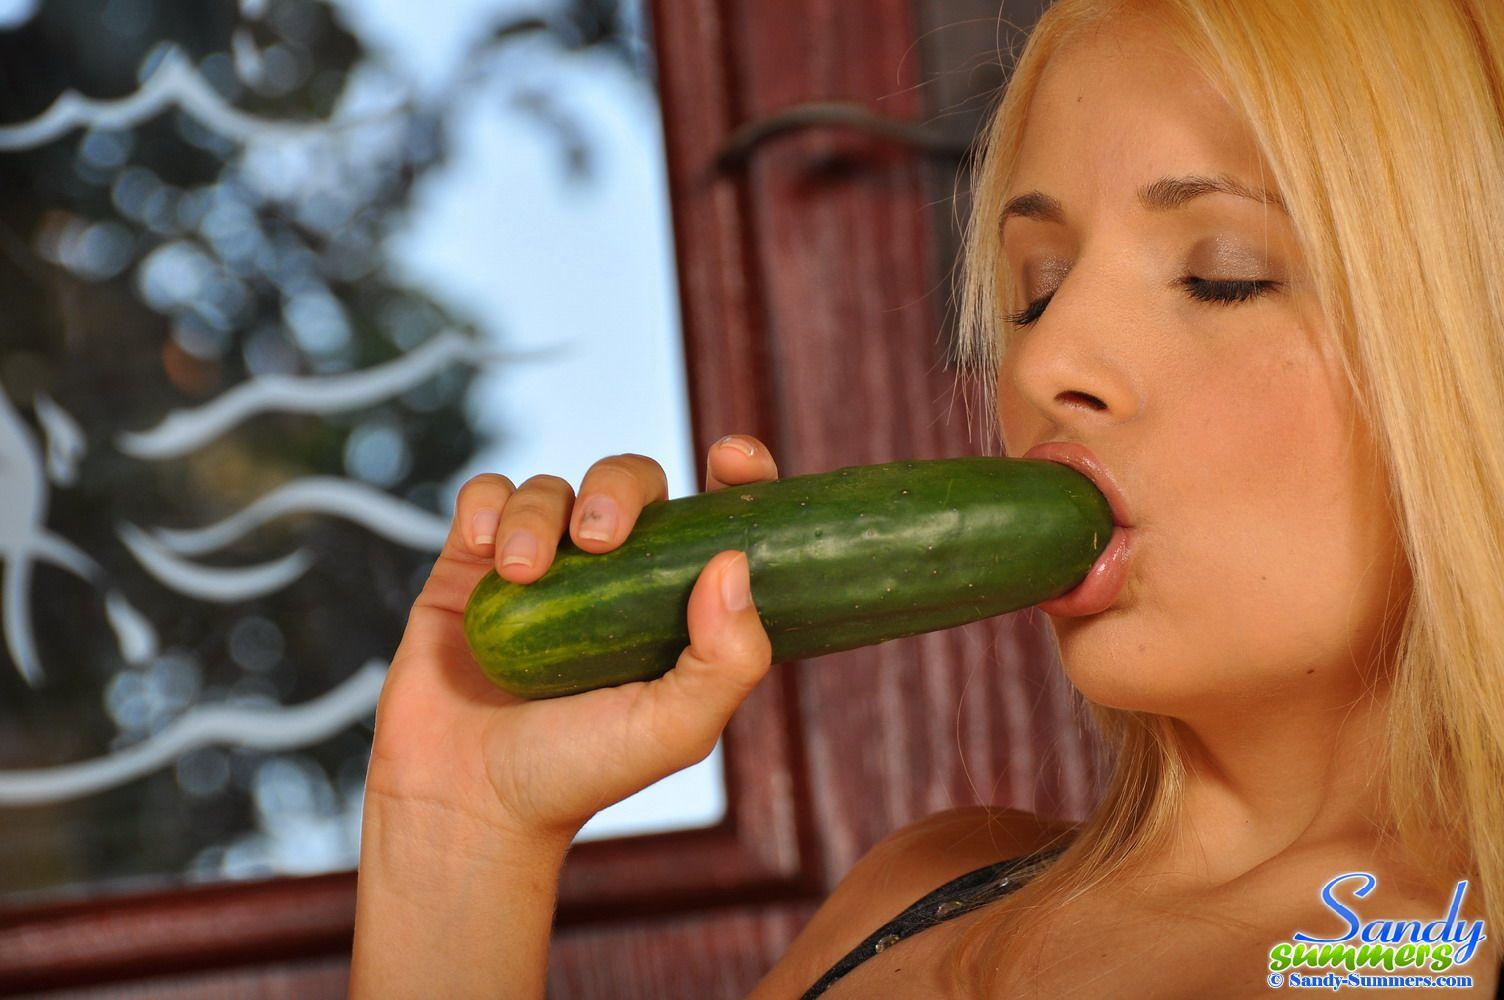 Pictures of teen porn girl Sandy Summers fucking a cucumber #59910205